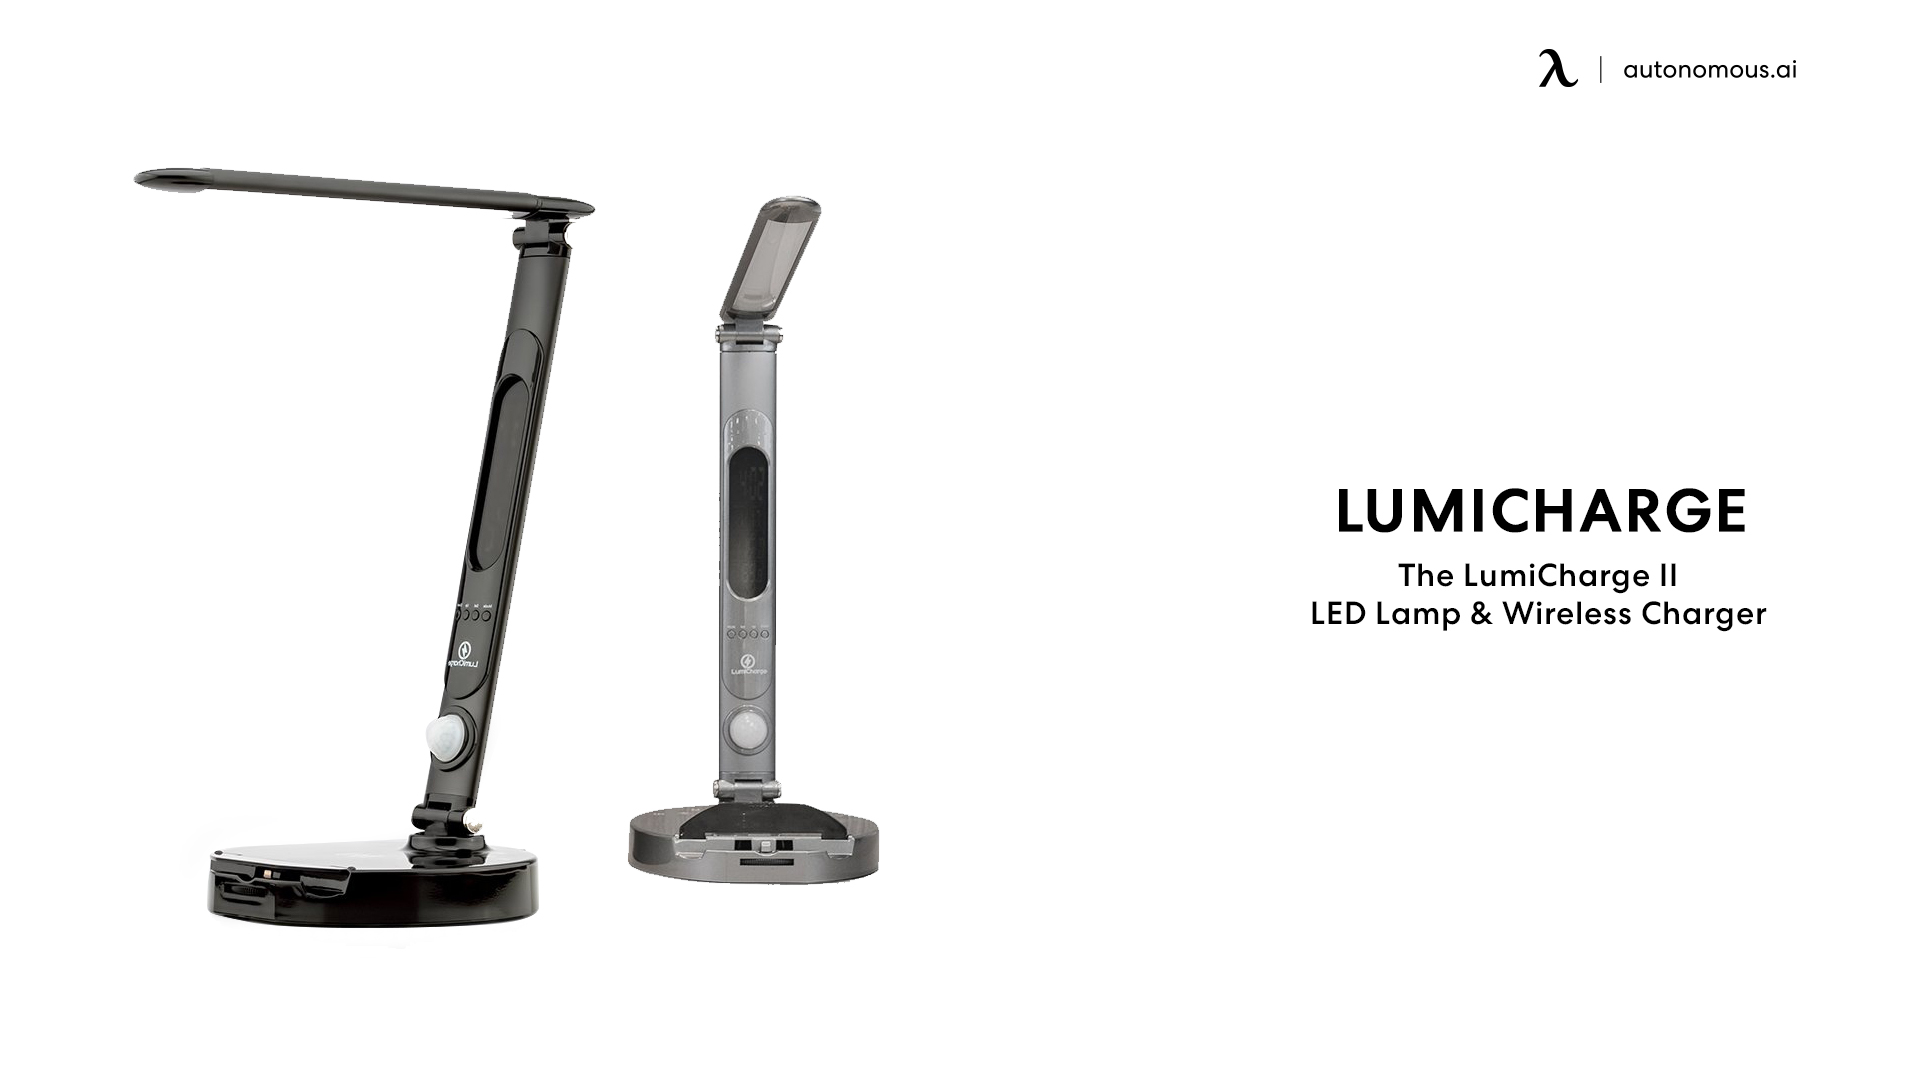 LED Lamp with Wireless Charger by Lumicharge